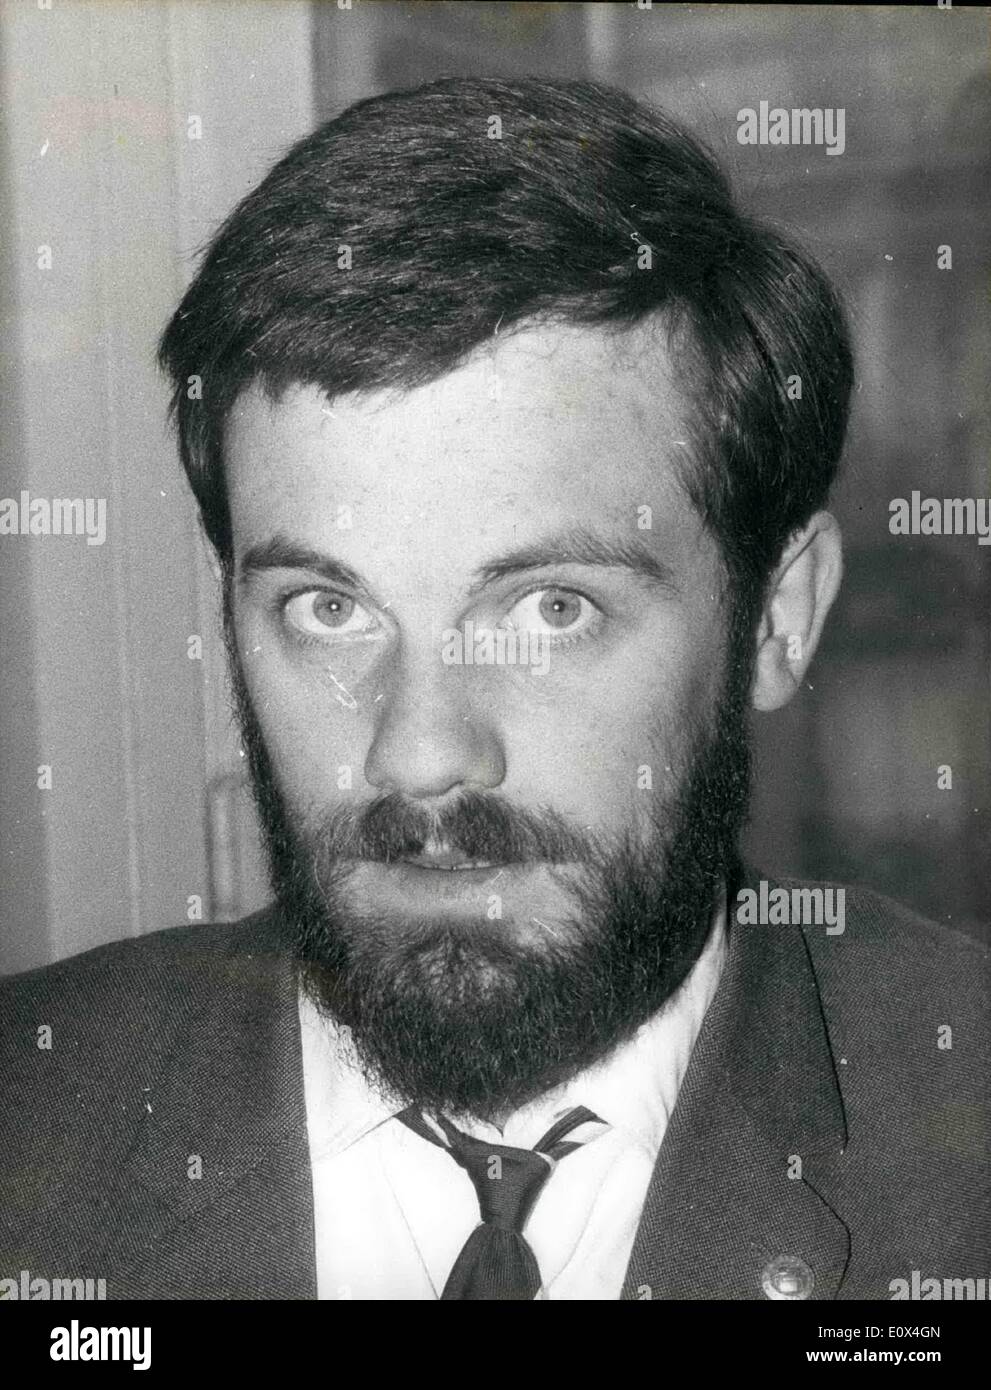 Apr. 04, 1965 - French Students Union New President; Photo Shows 22 year old Paris Student Francois Vallit who has been elected Stock Photo